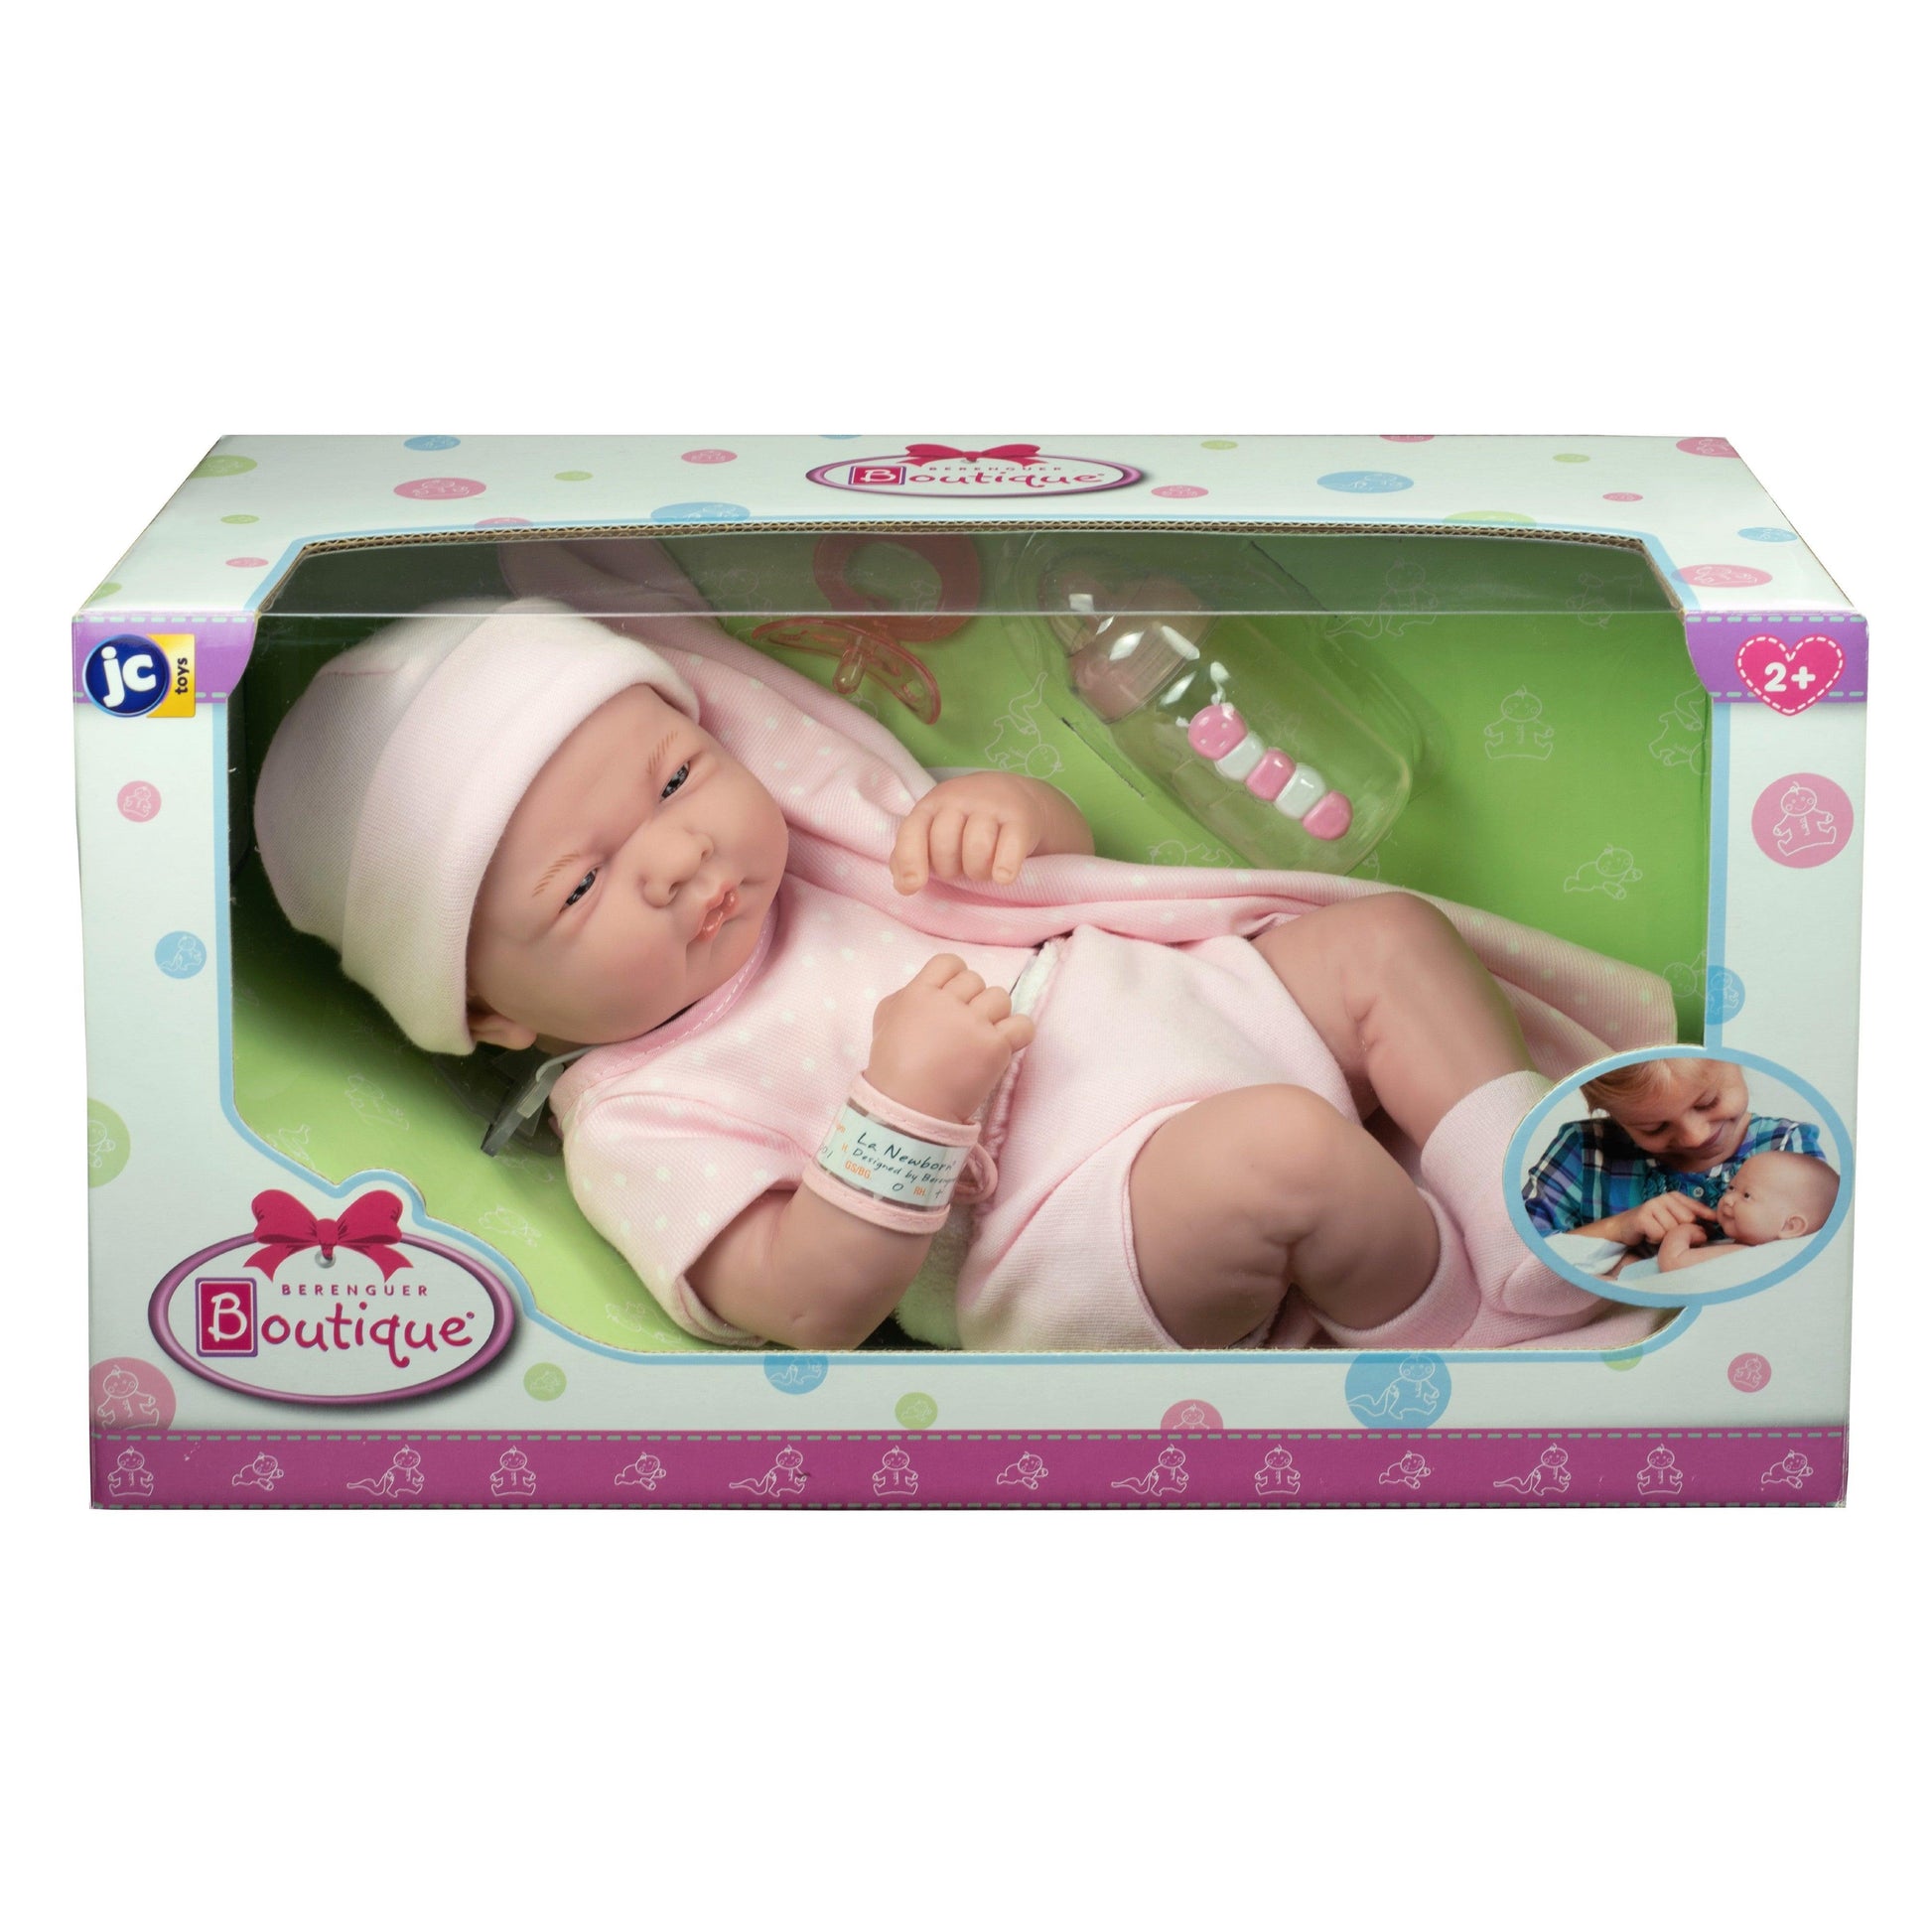 JC Toys, La Newborn Boutique 14 Inch Real Girl Doll-Pink Outfit 9 Pcs Gift Set - JC Toys Group Inc.